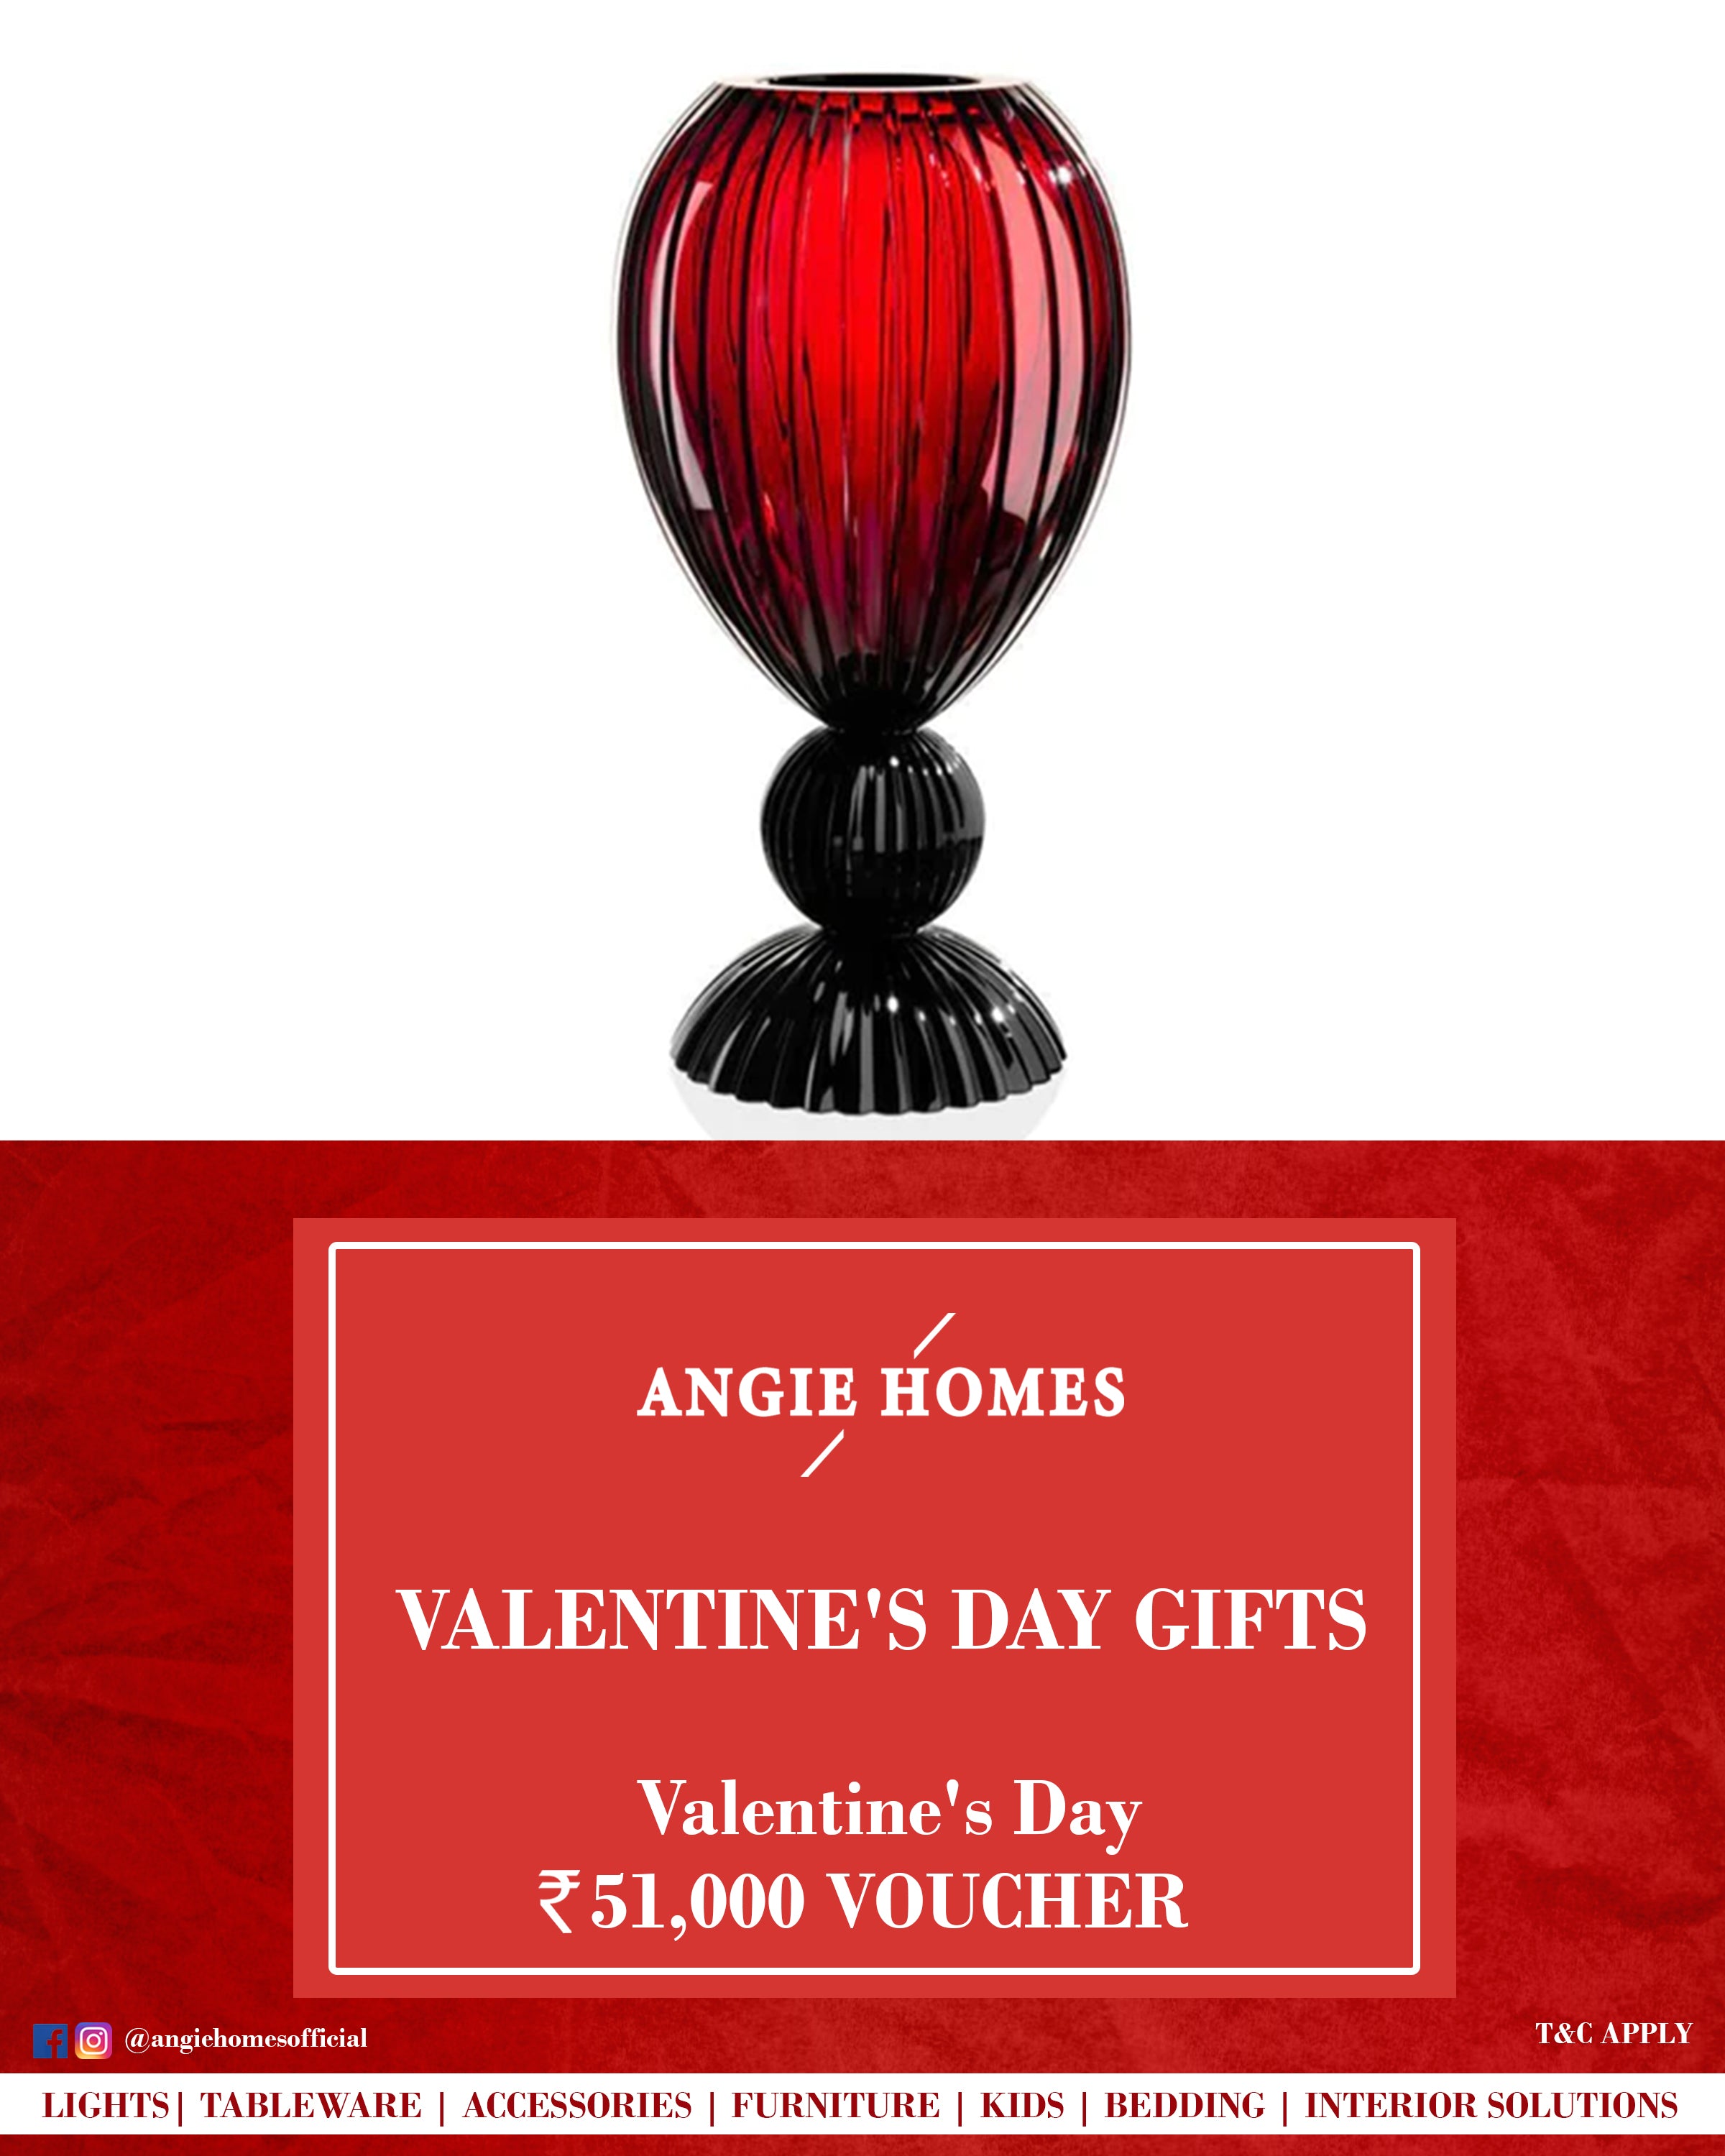 Online Happy Valentine's Day Gift Card Voucher for Black & Red Vases ANGIE HOMES